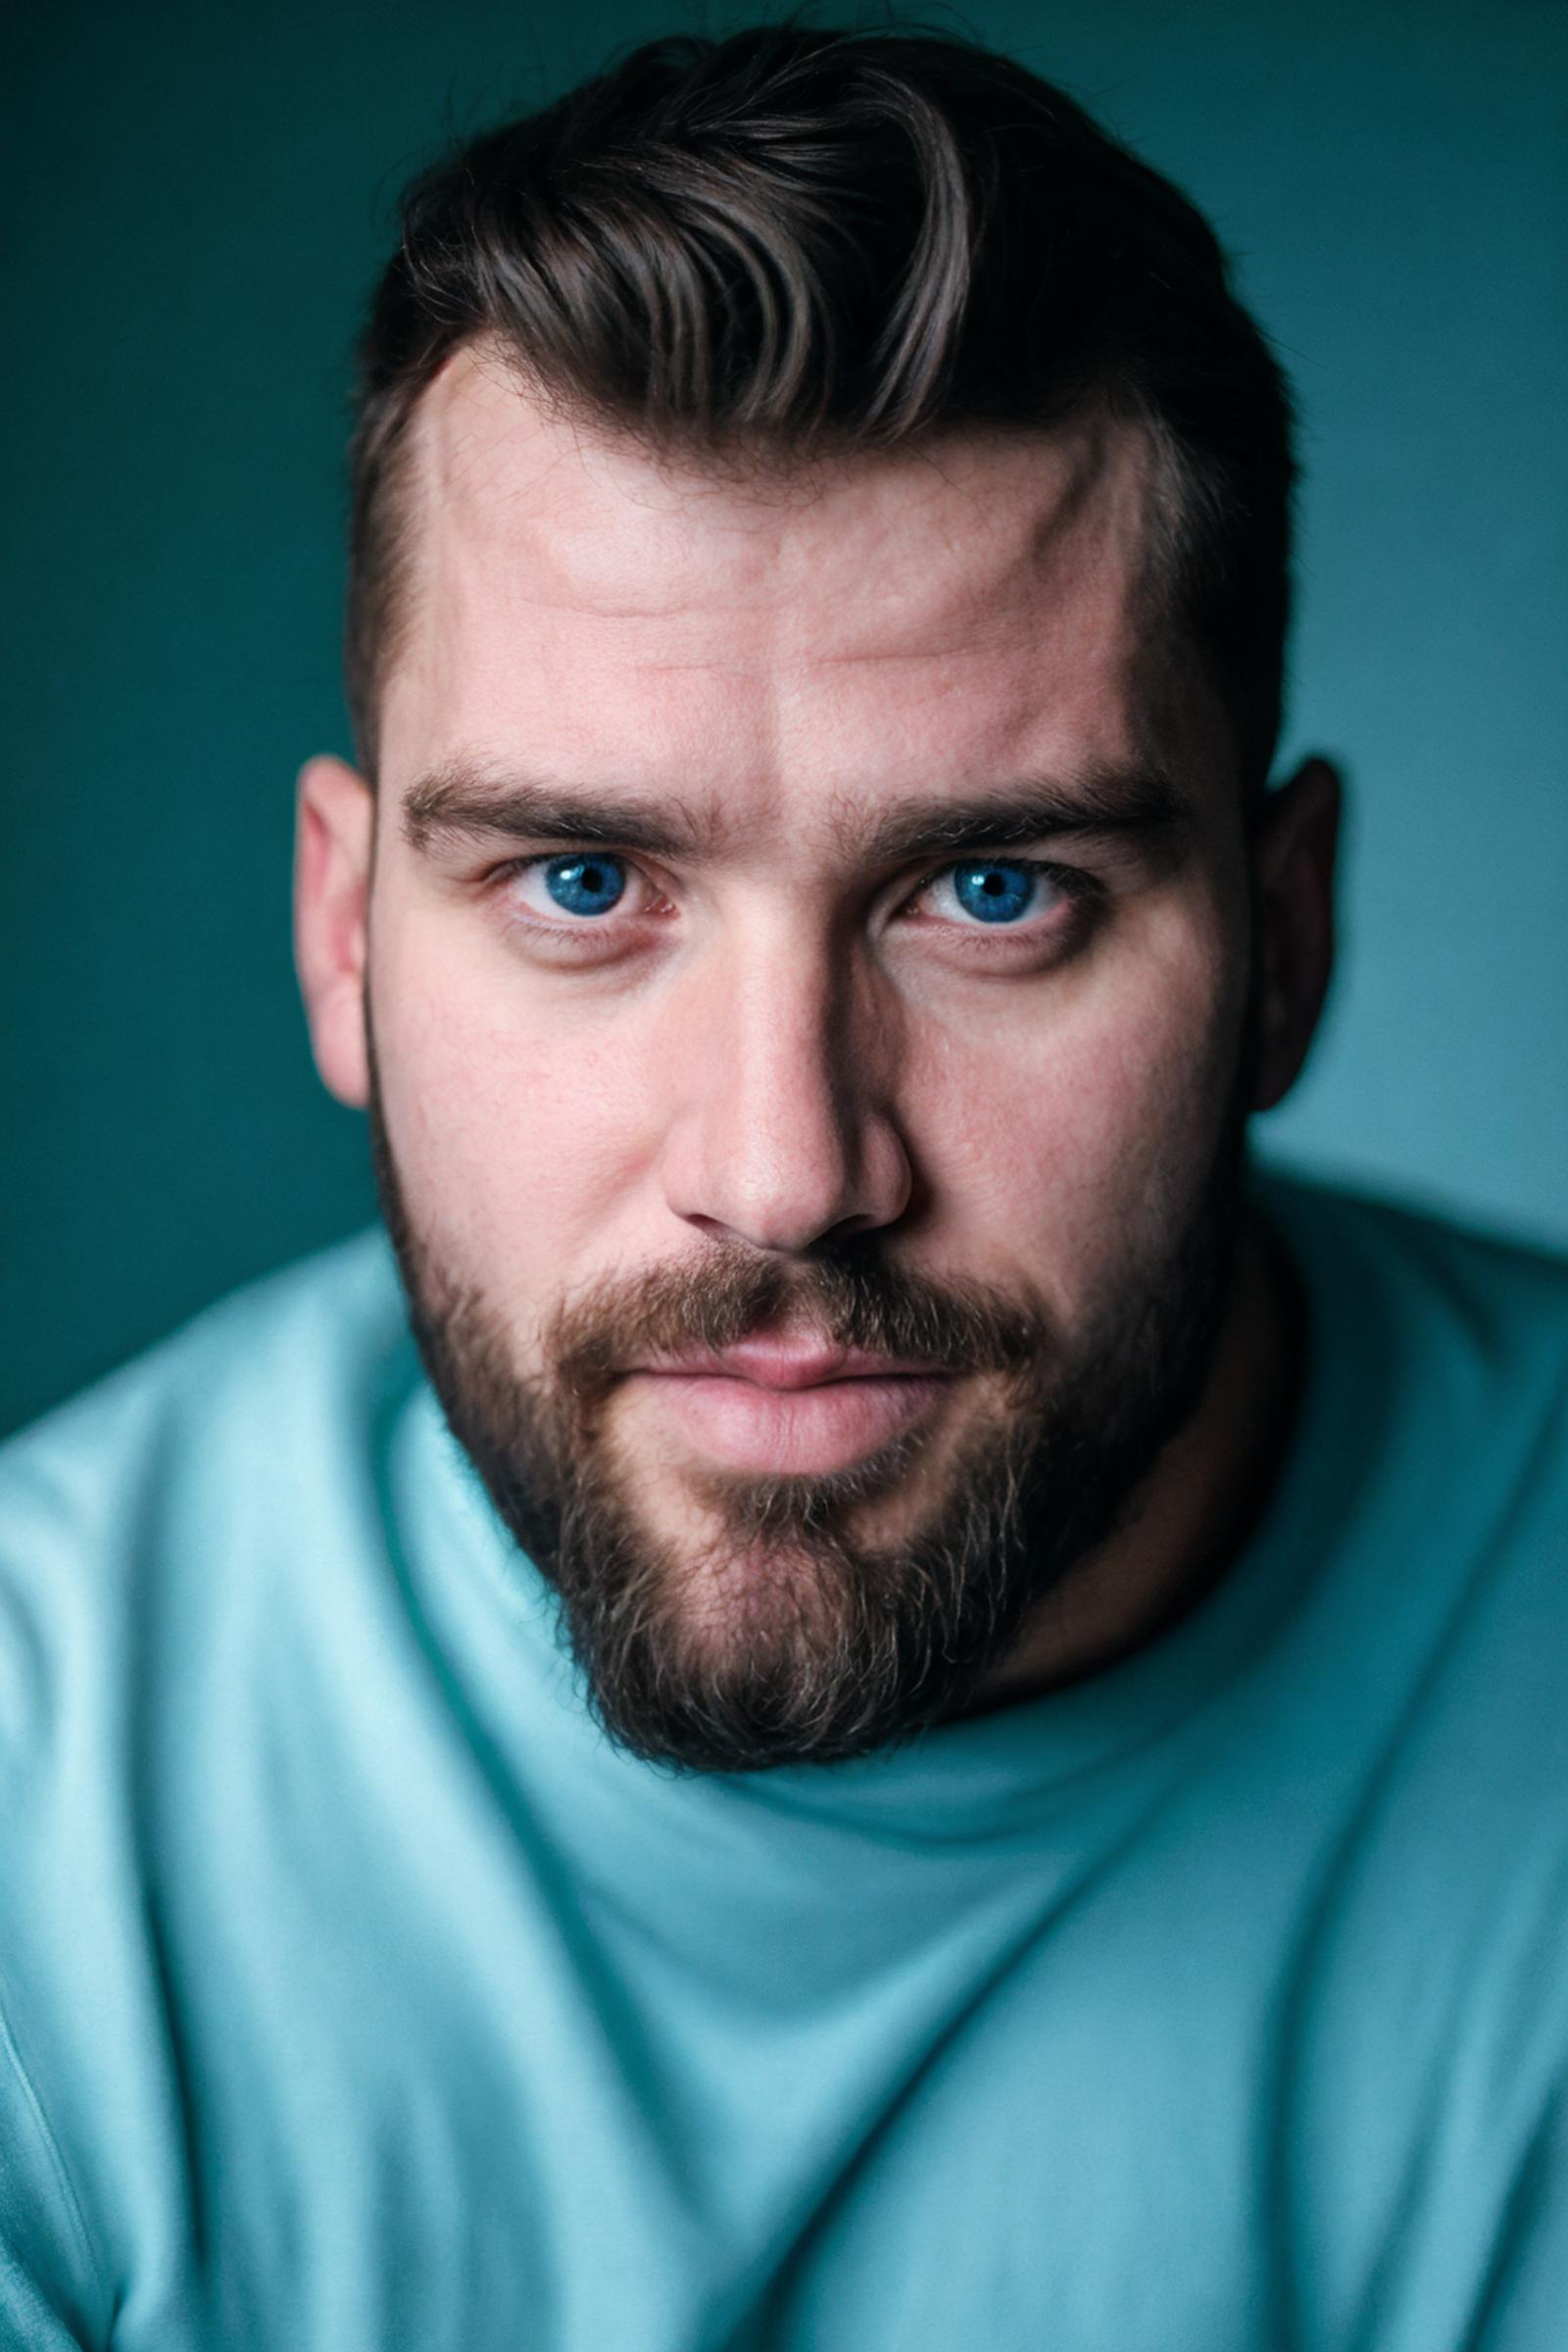 Man with blue eyes and beard in a blue shirt.